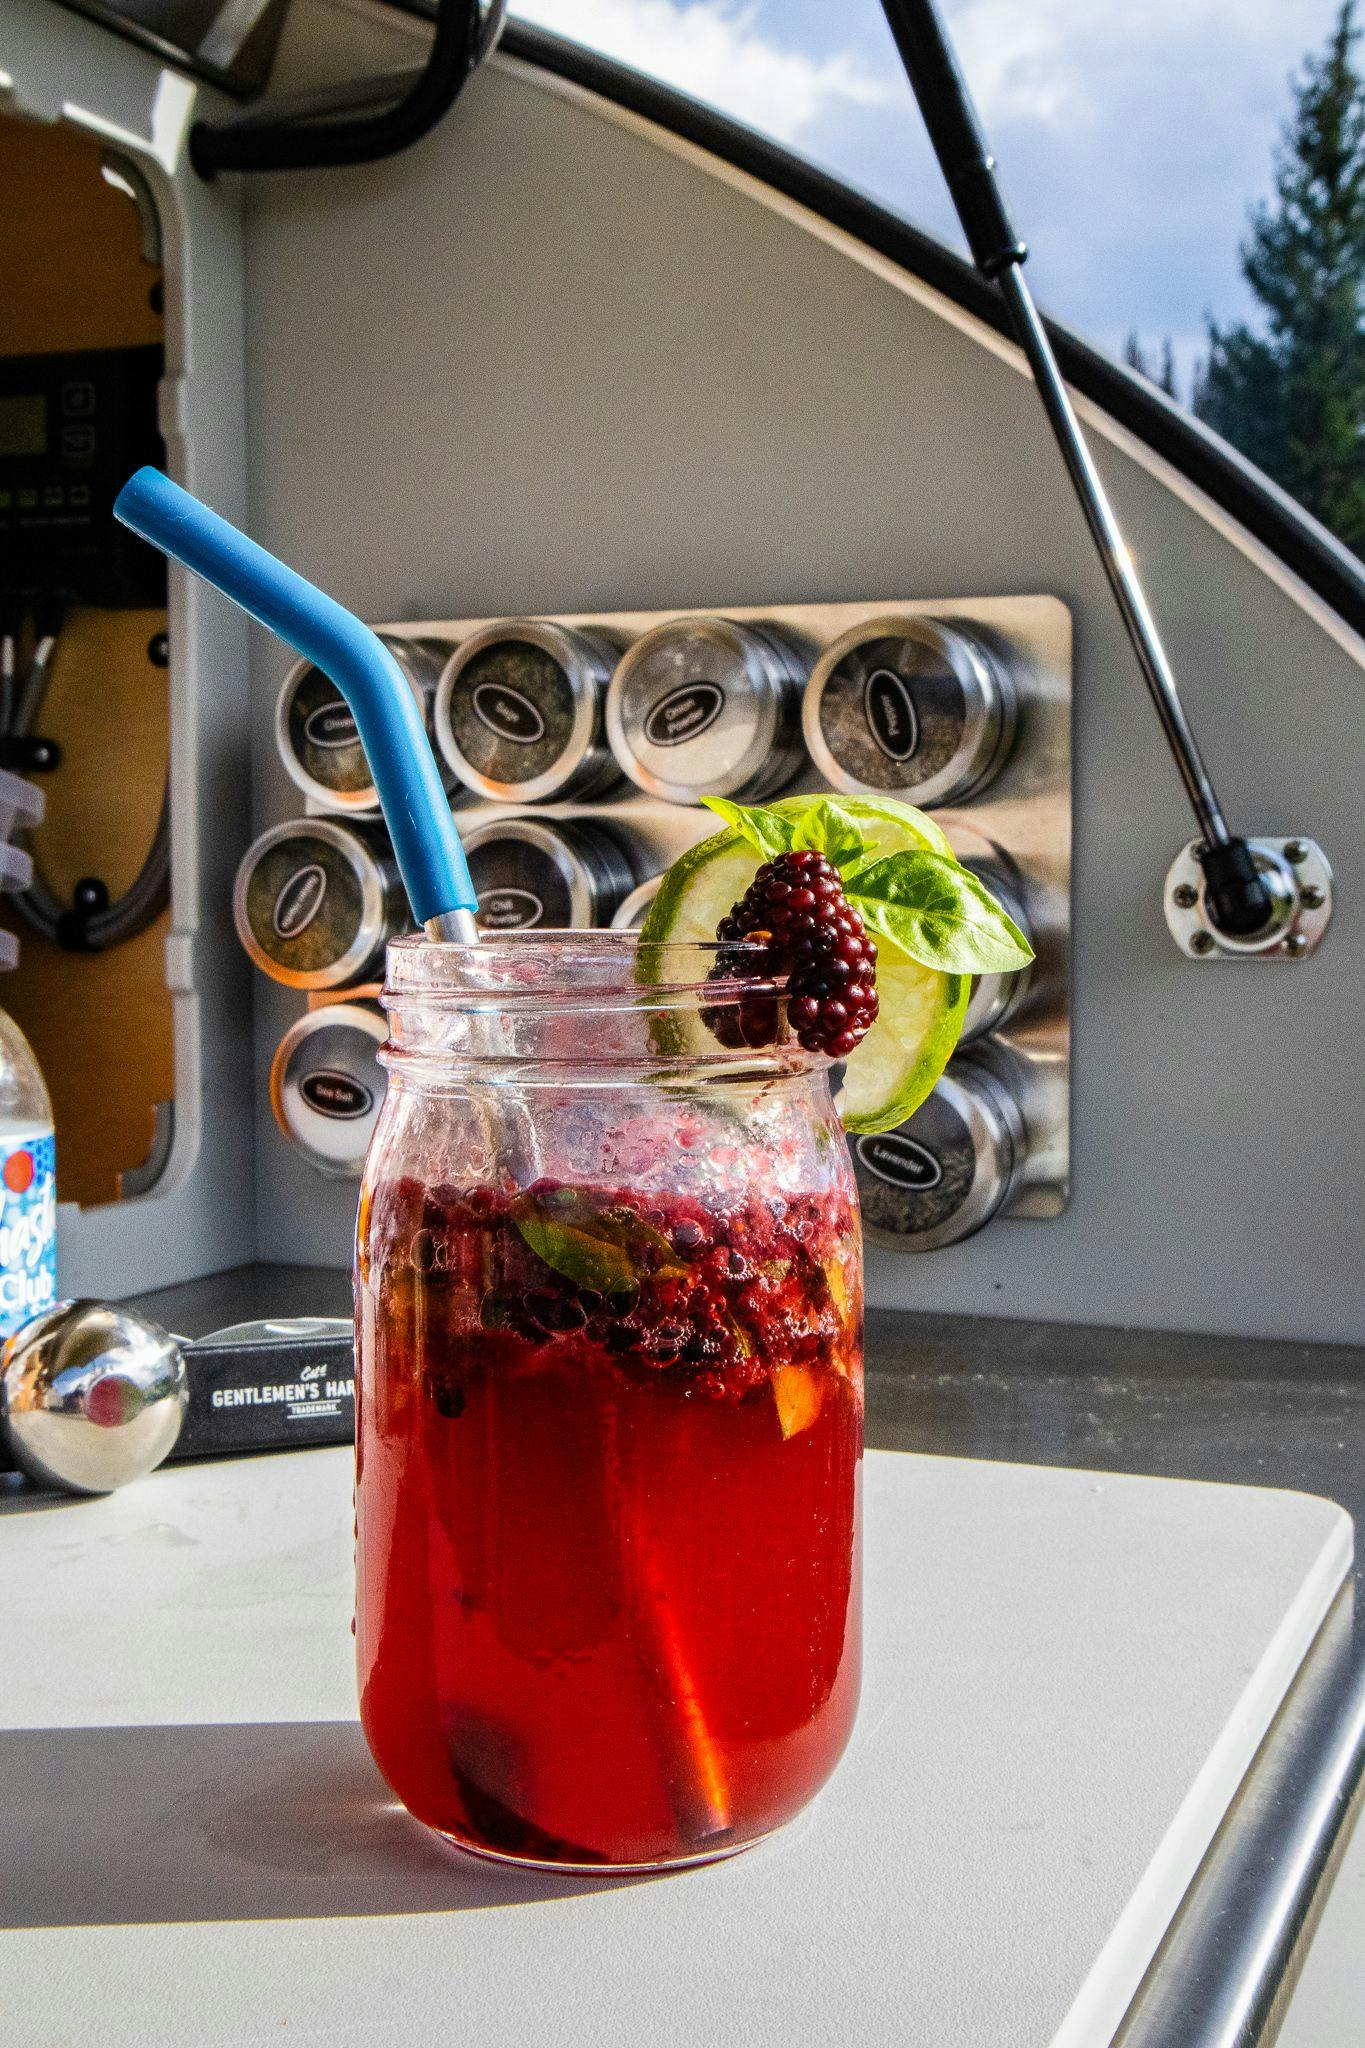 cold, refreshing camp cocktail called the Blackberry Smash sitting in the galley of an off-road teardrop trailer called Original TOPO